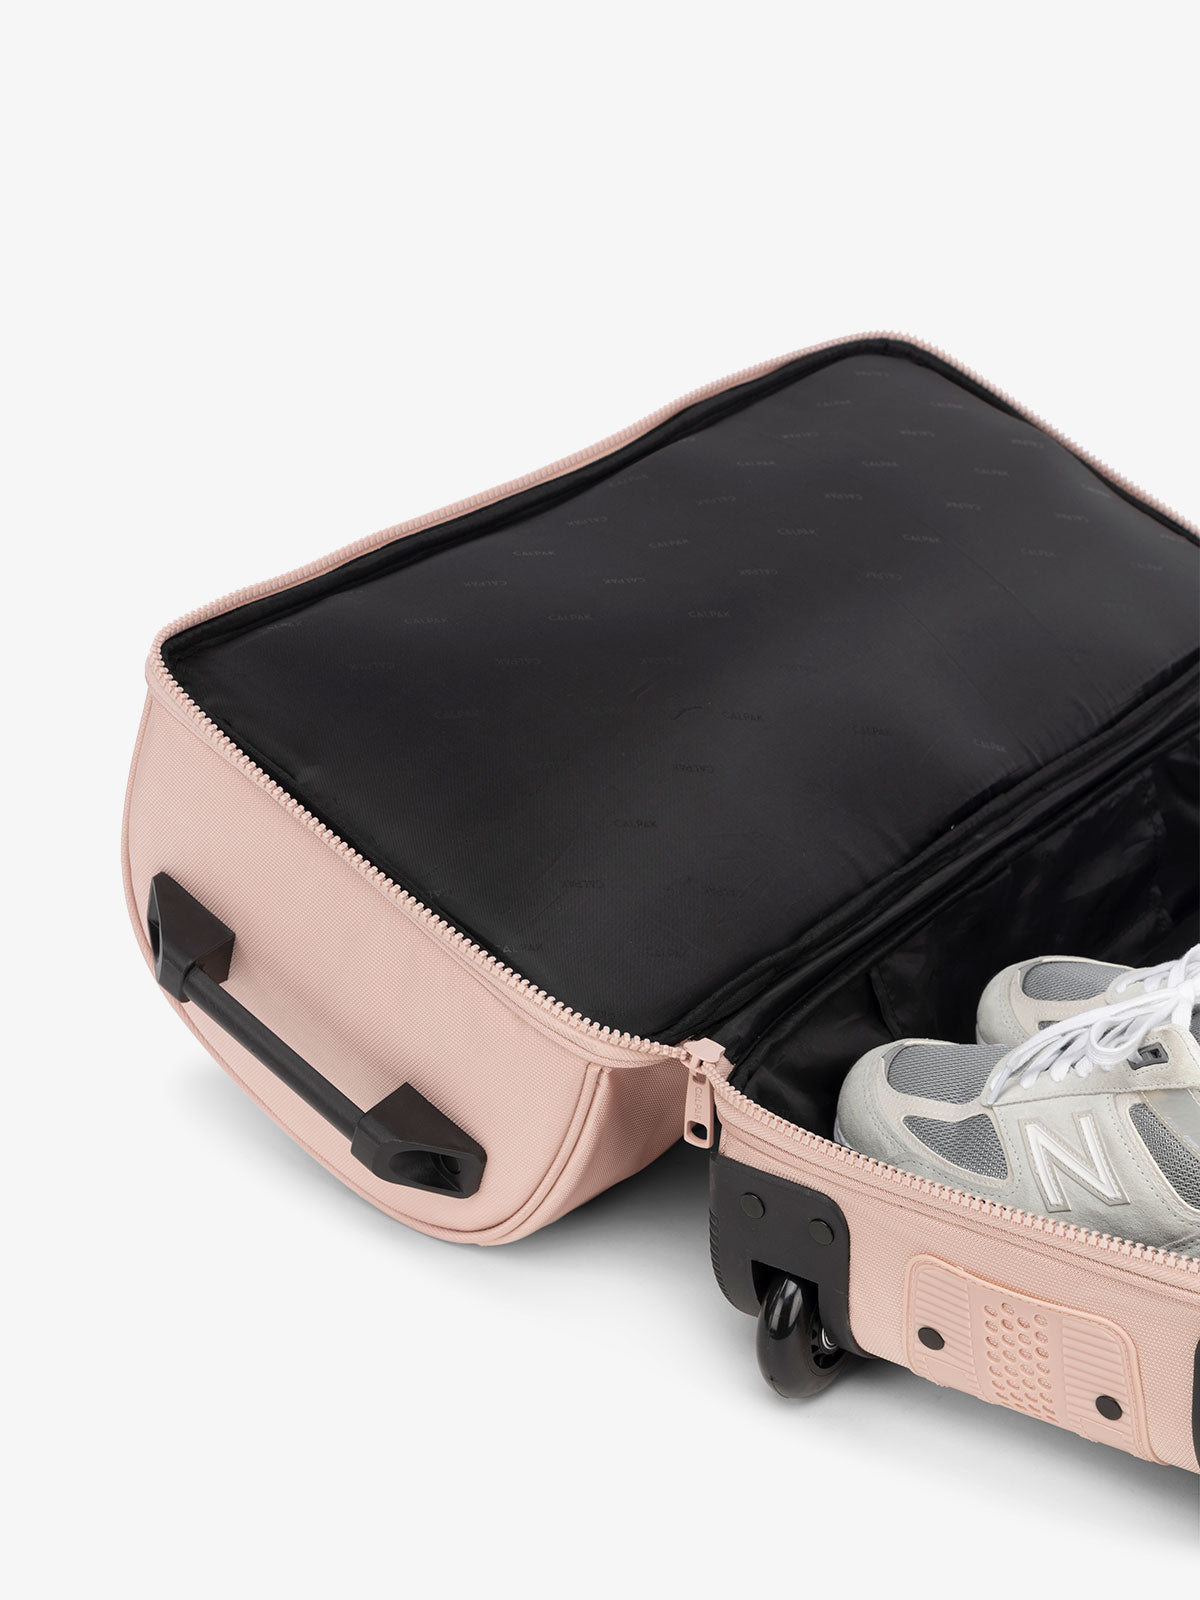 CALPAK Stevyn Rolling Duffle interior of shoe compartment in pink sand